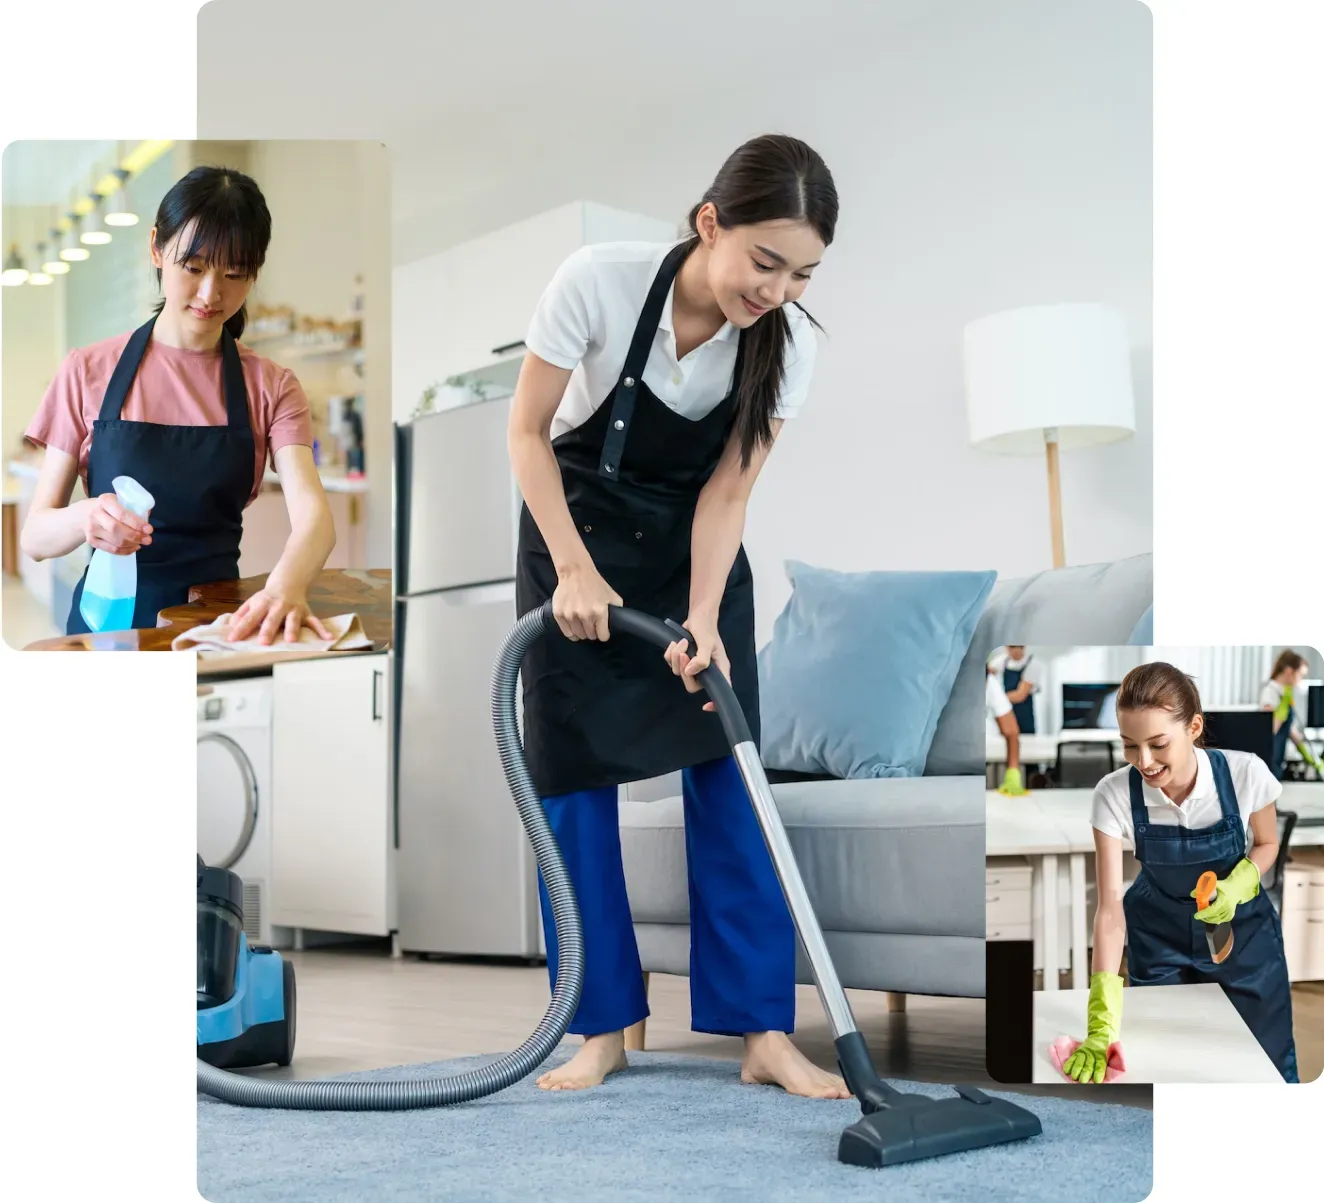 Team Cleaning